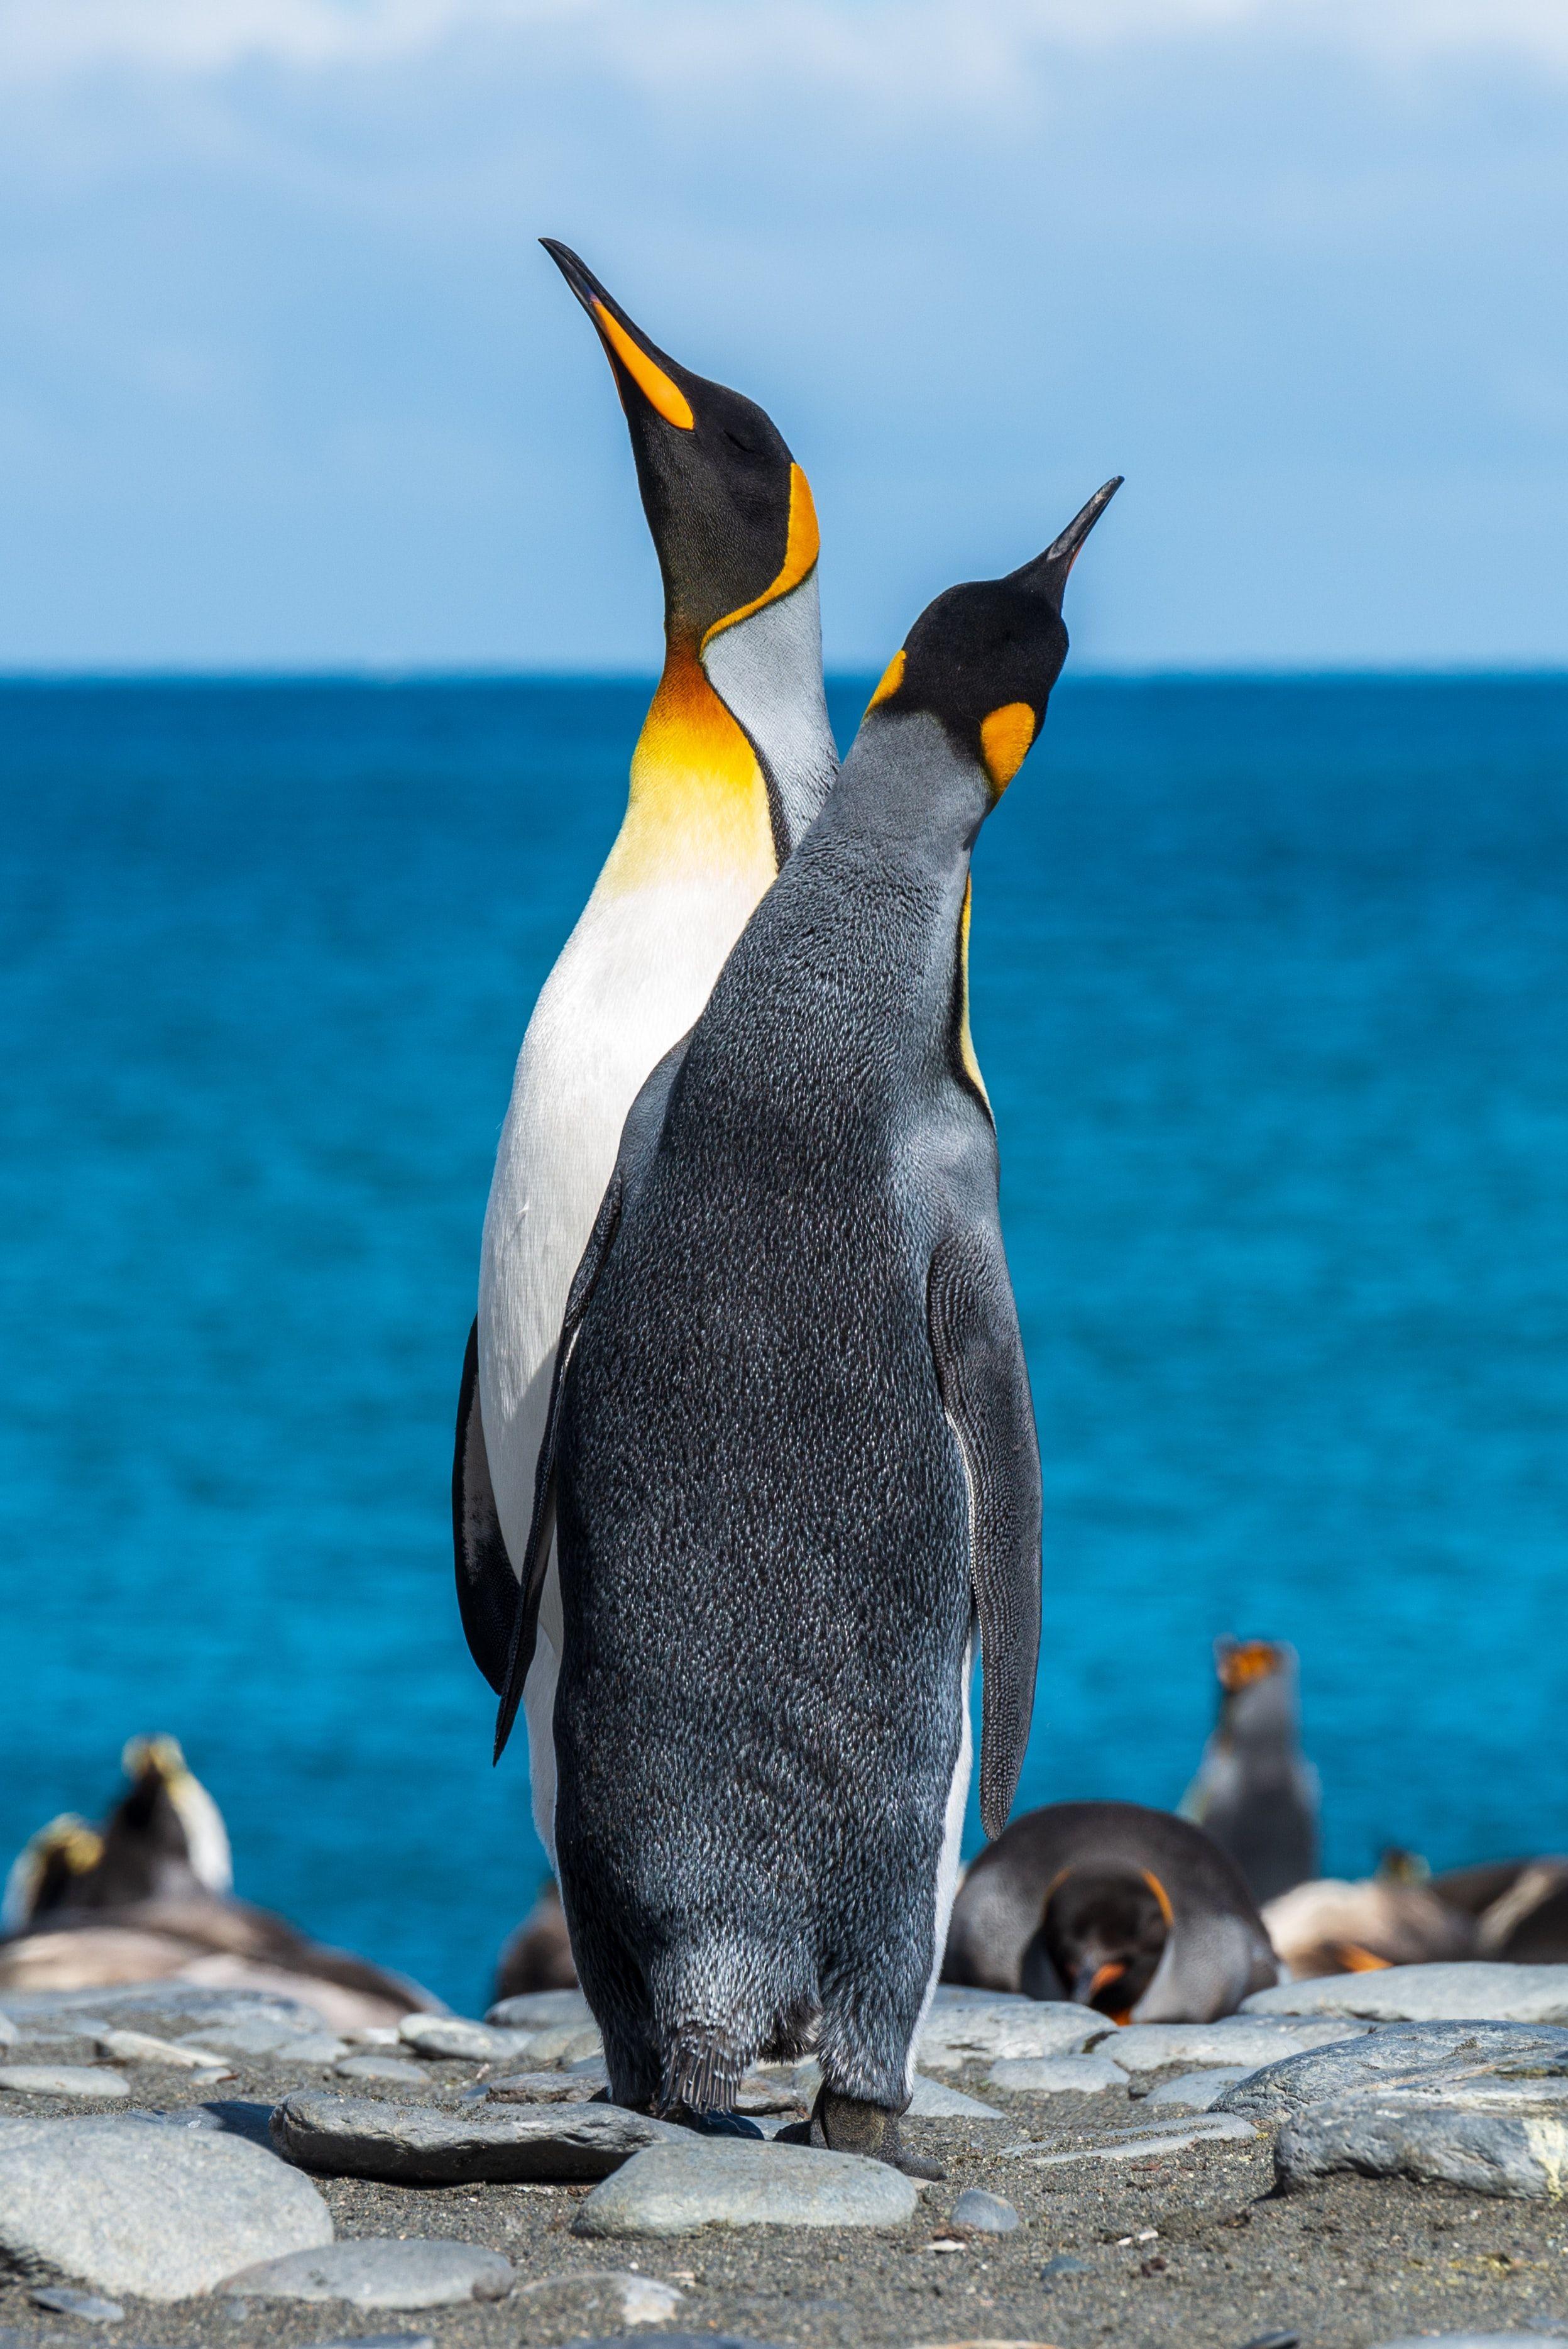 Download Penguin wallpapers for mobile phone free Penguin HD pictures